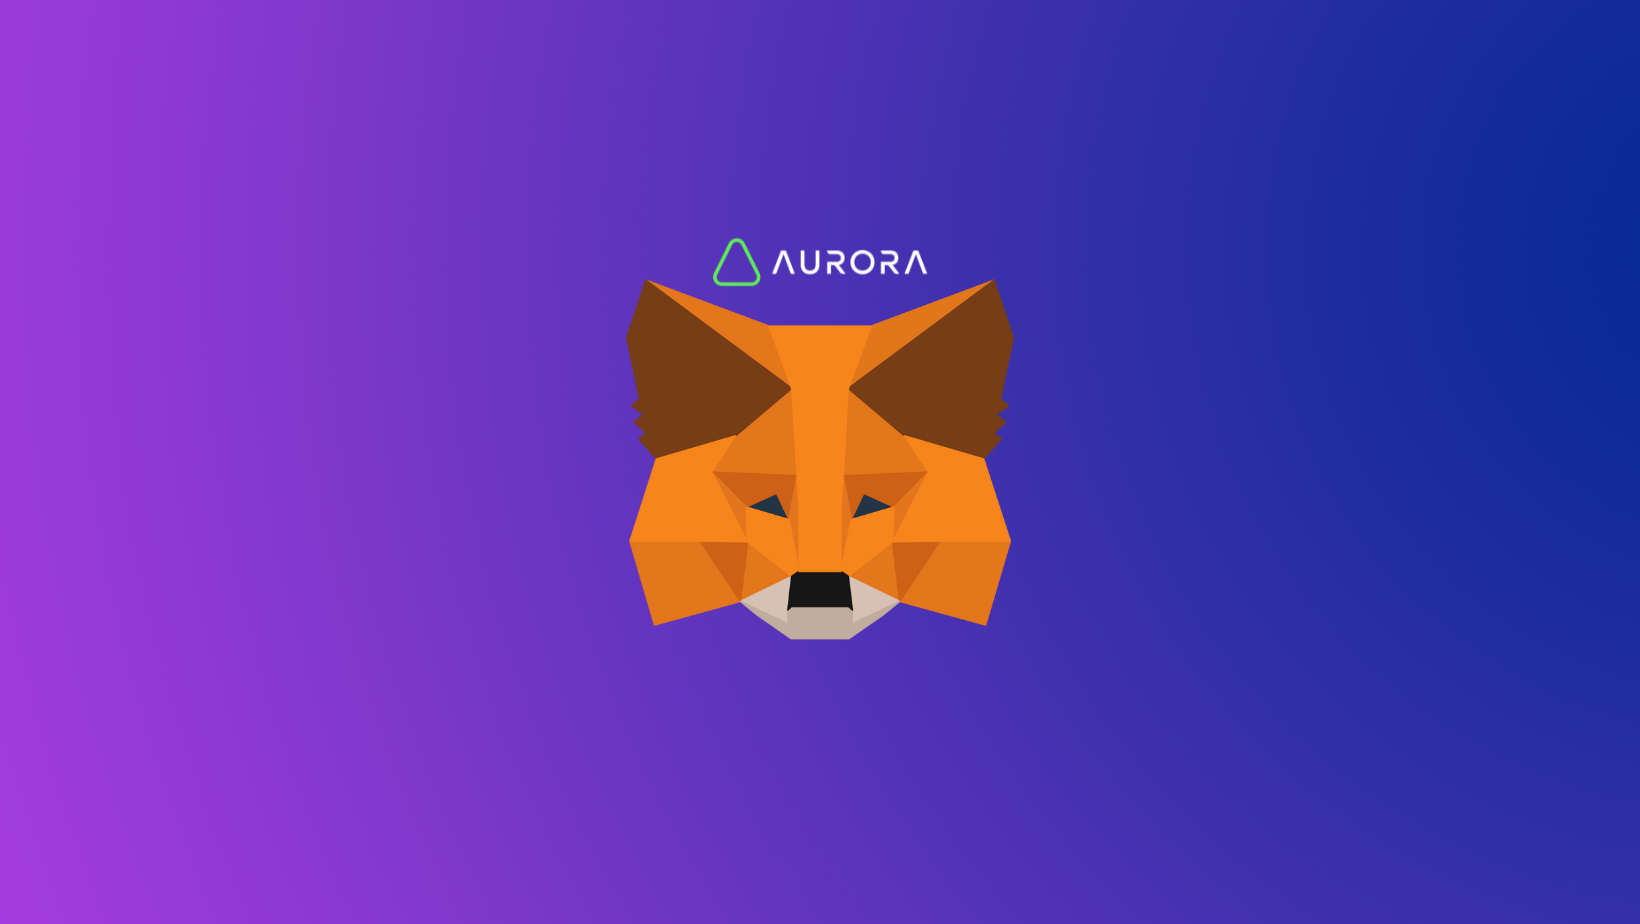 How to add Aurora (AOA) to MetaMask Wallet